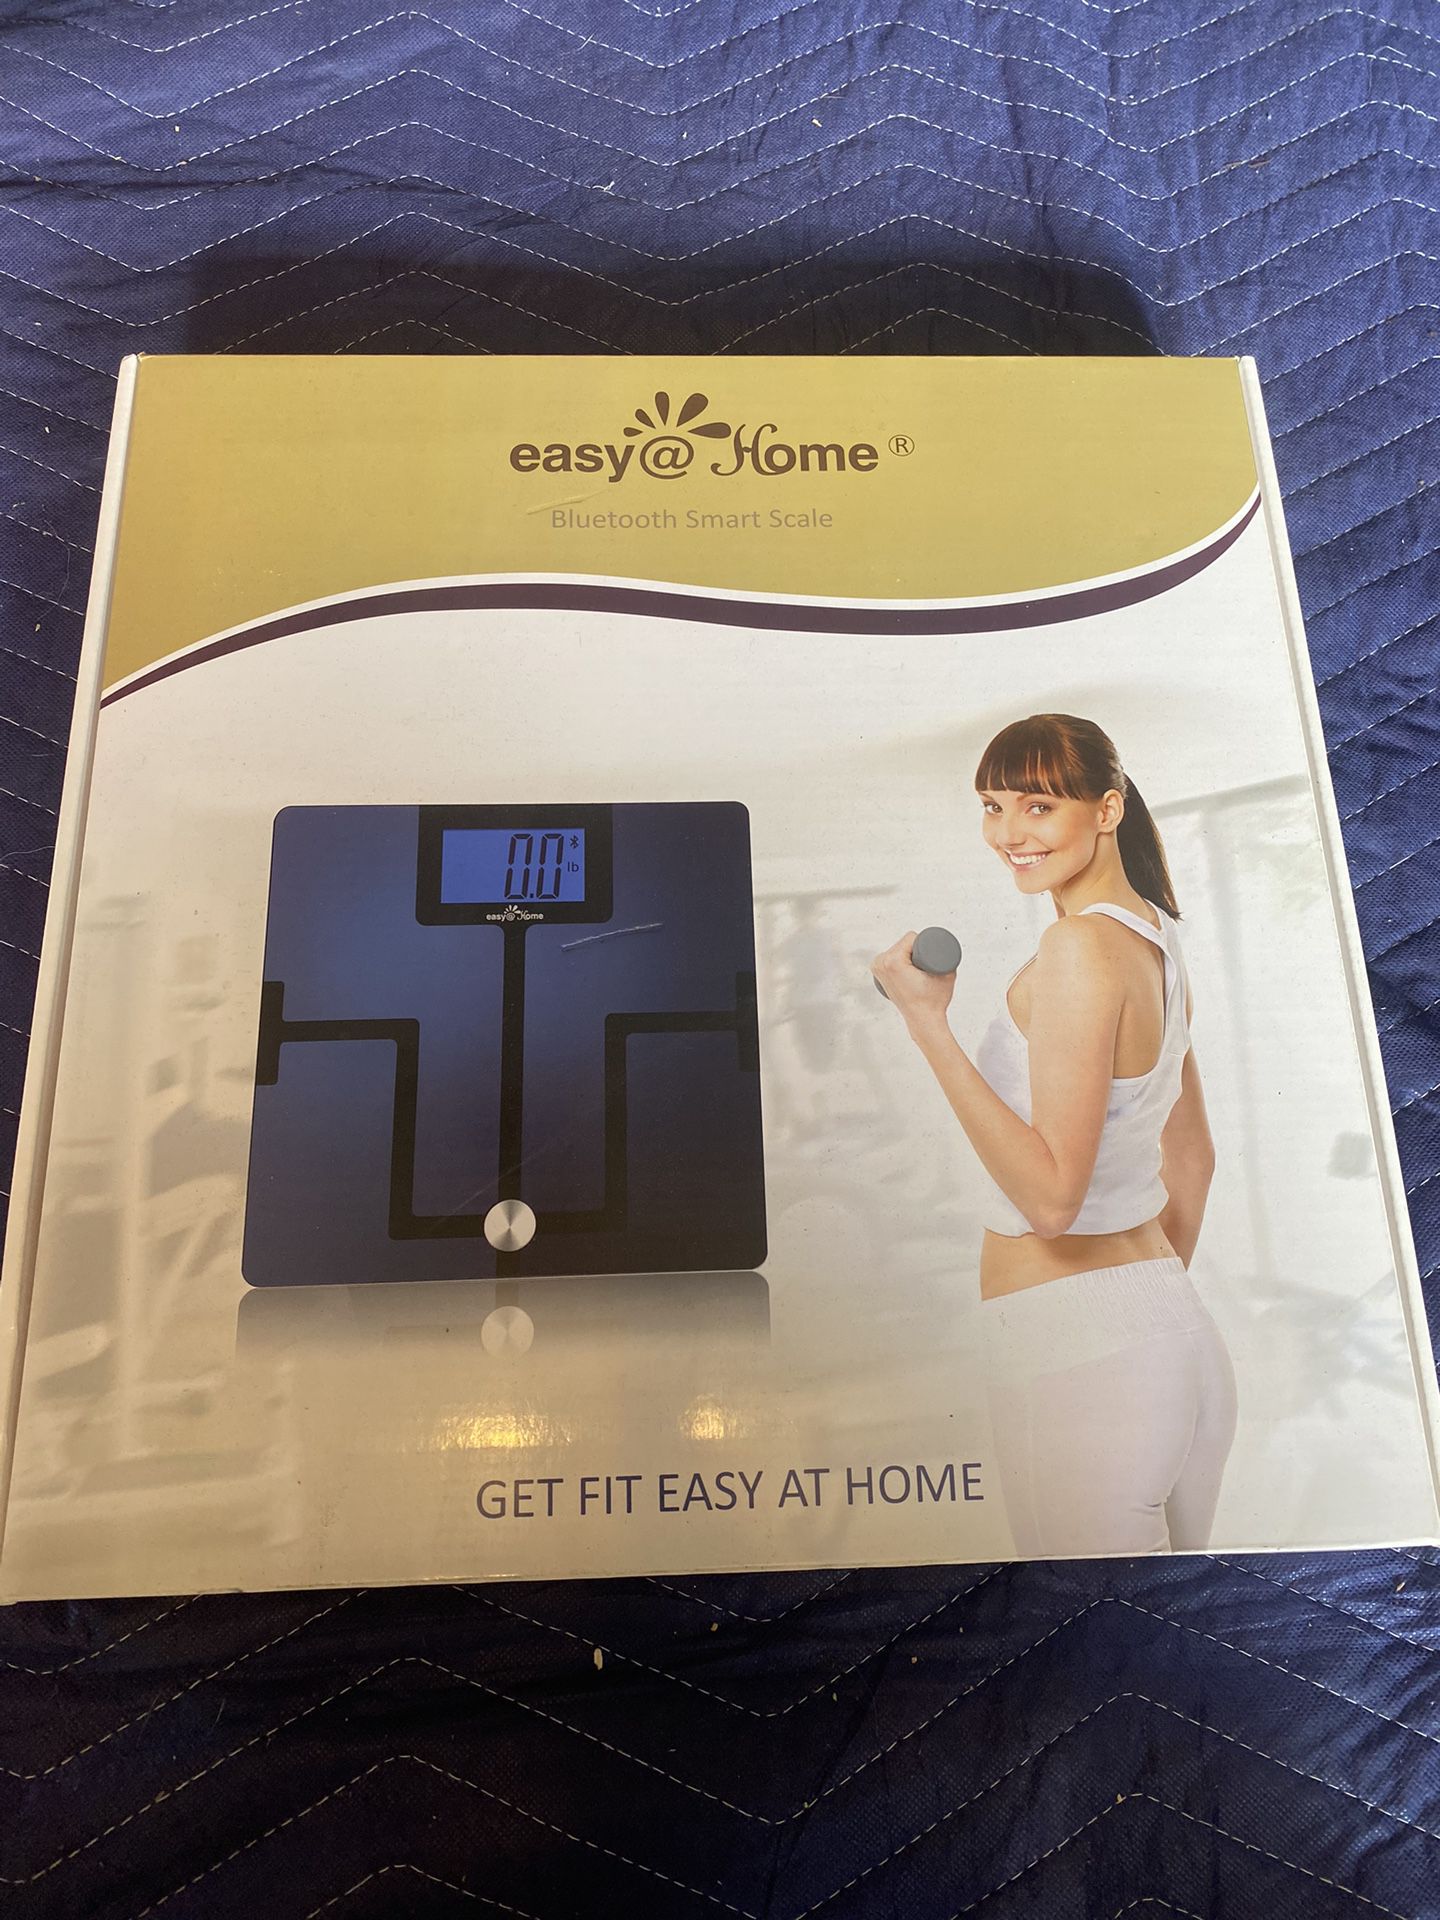 NEW UNOPENED: Easy at Home Bluetooth Smart Scale